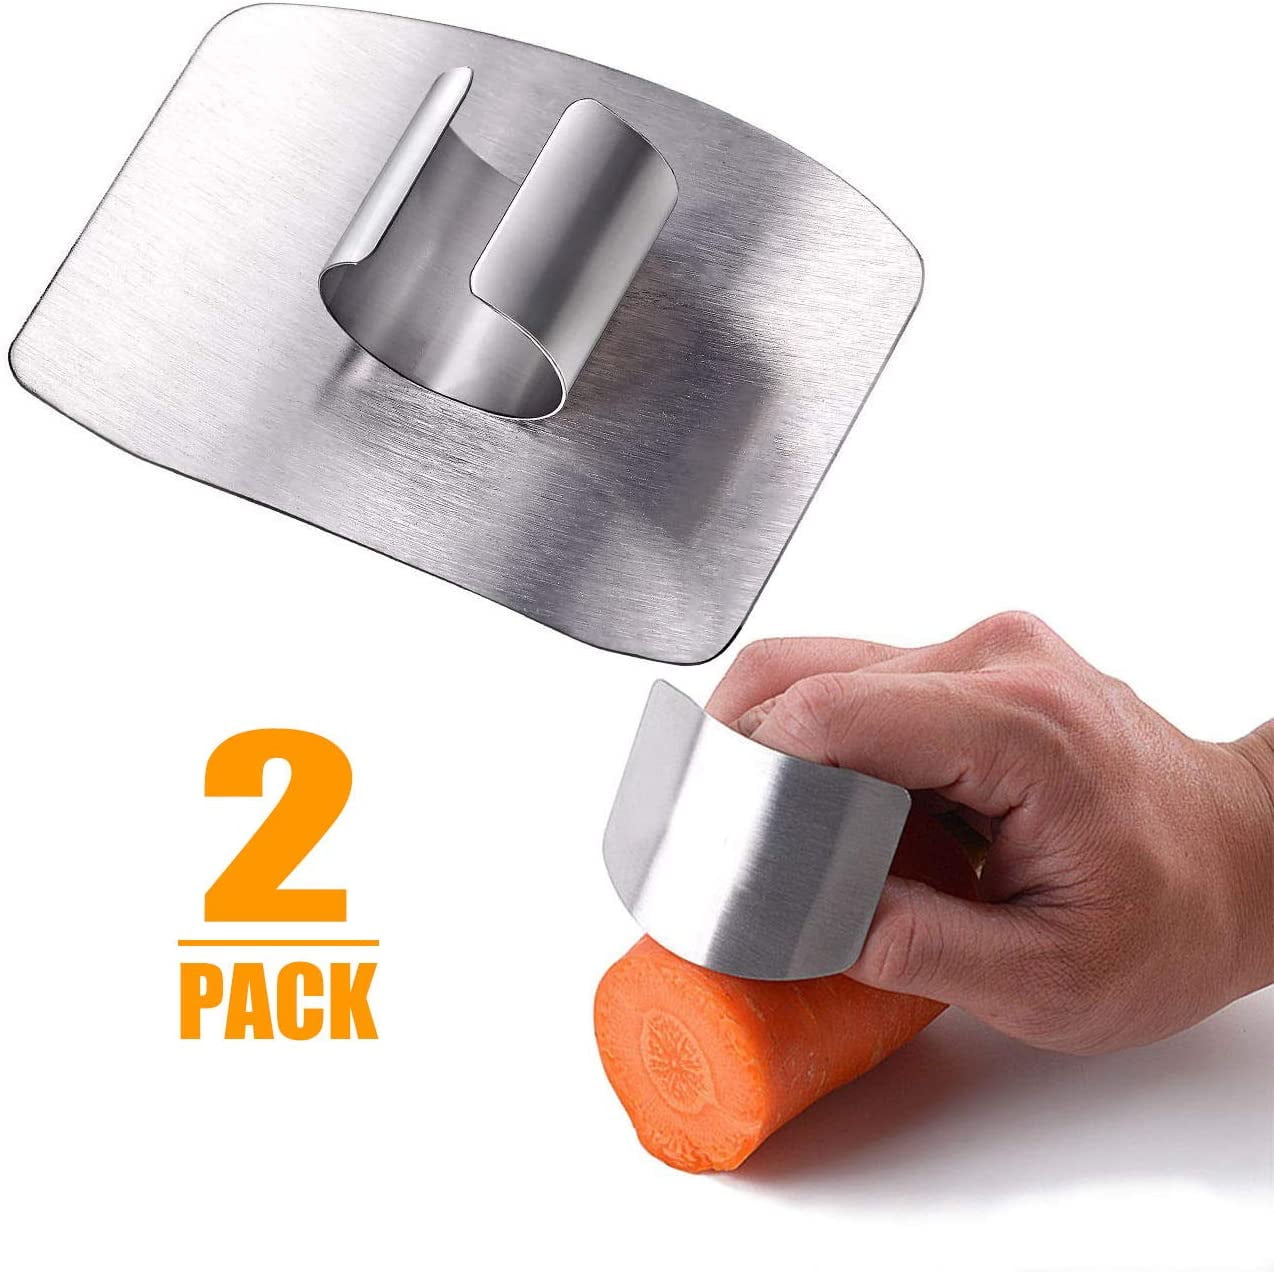 1Pc Fingers Protector Vegetable Cut Safe Stainless Steel Kitchen Hand Guard CSL2 